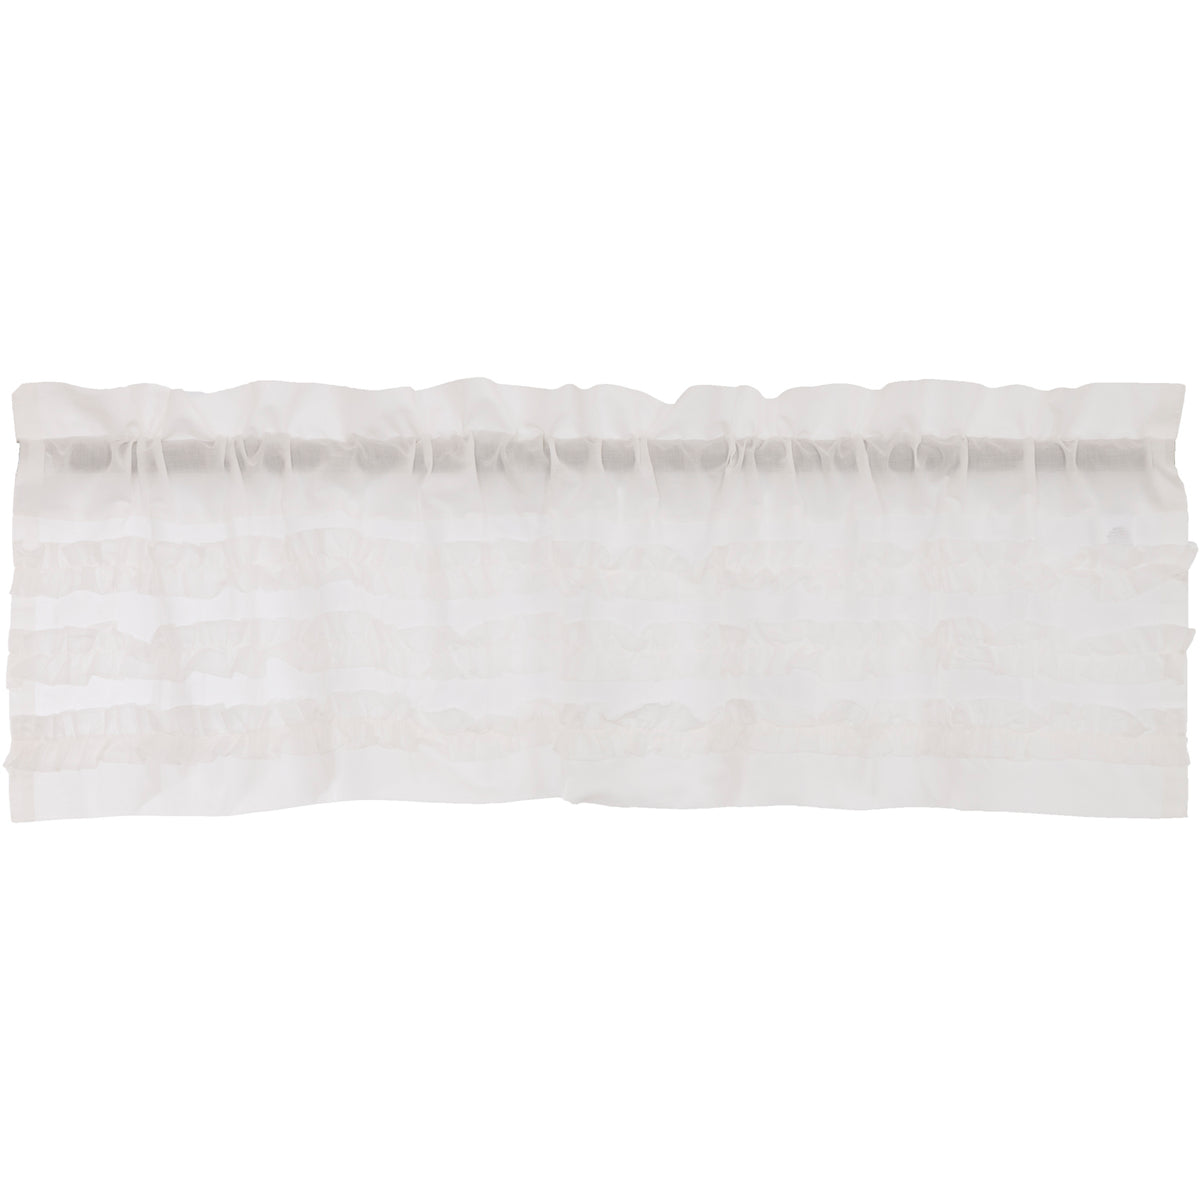 April & Olive White Ruffled Sheer Petticoat Valance 16x60 By VHC Brands